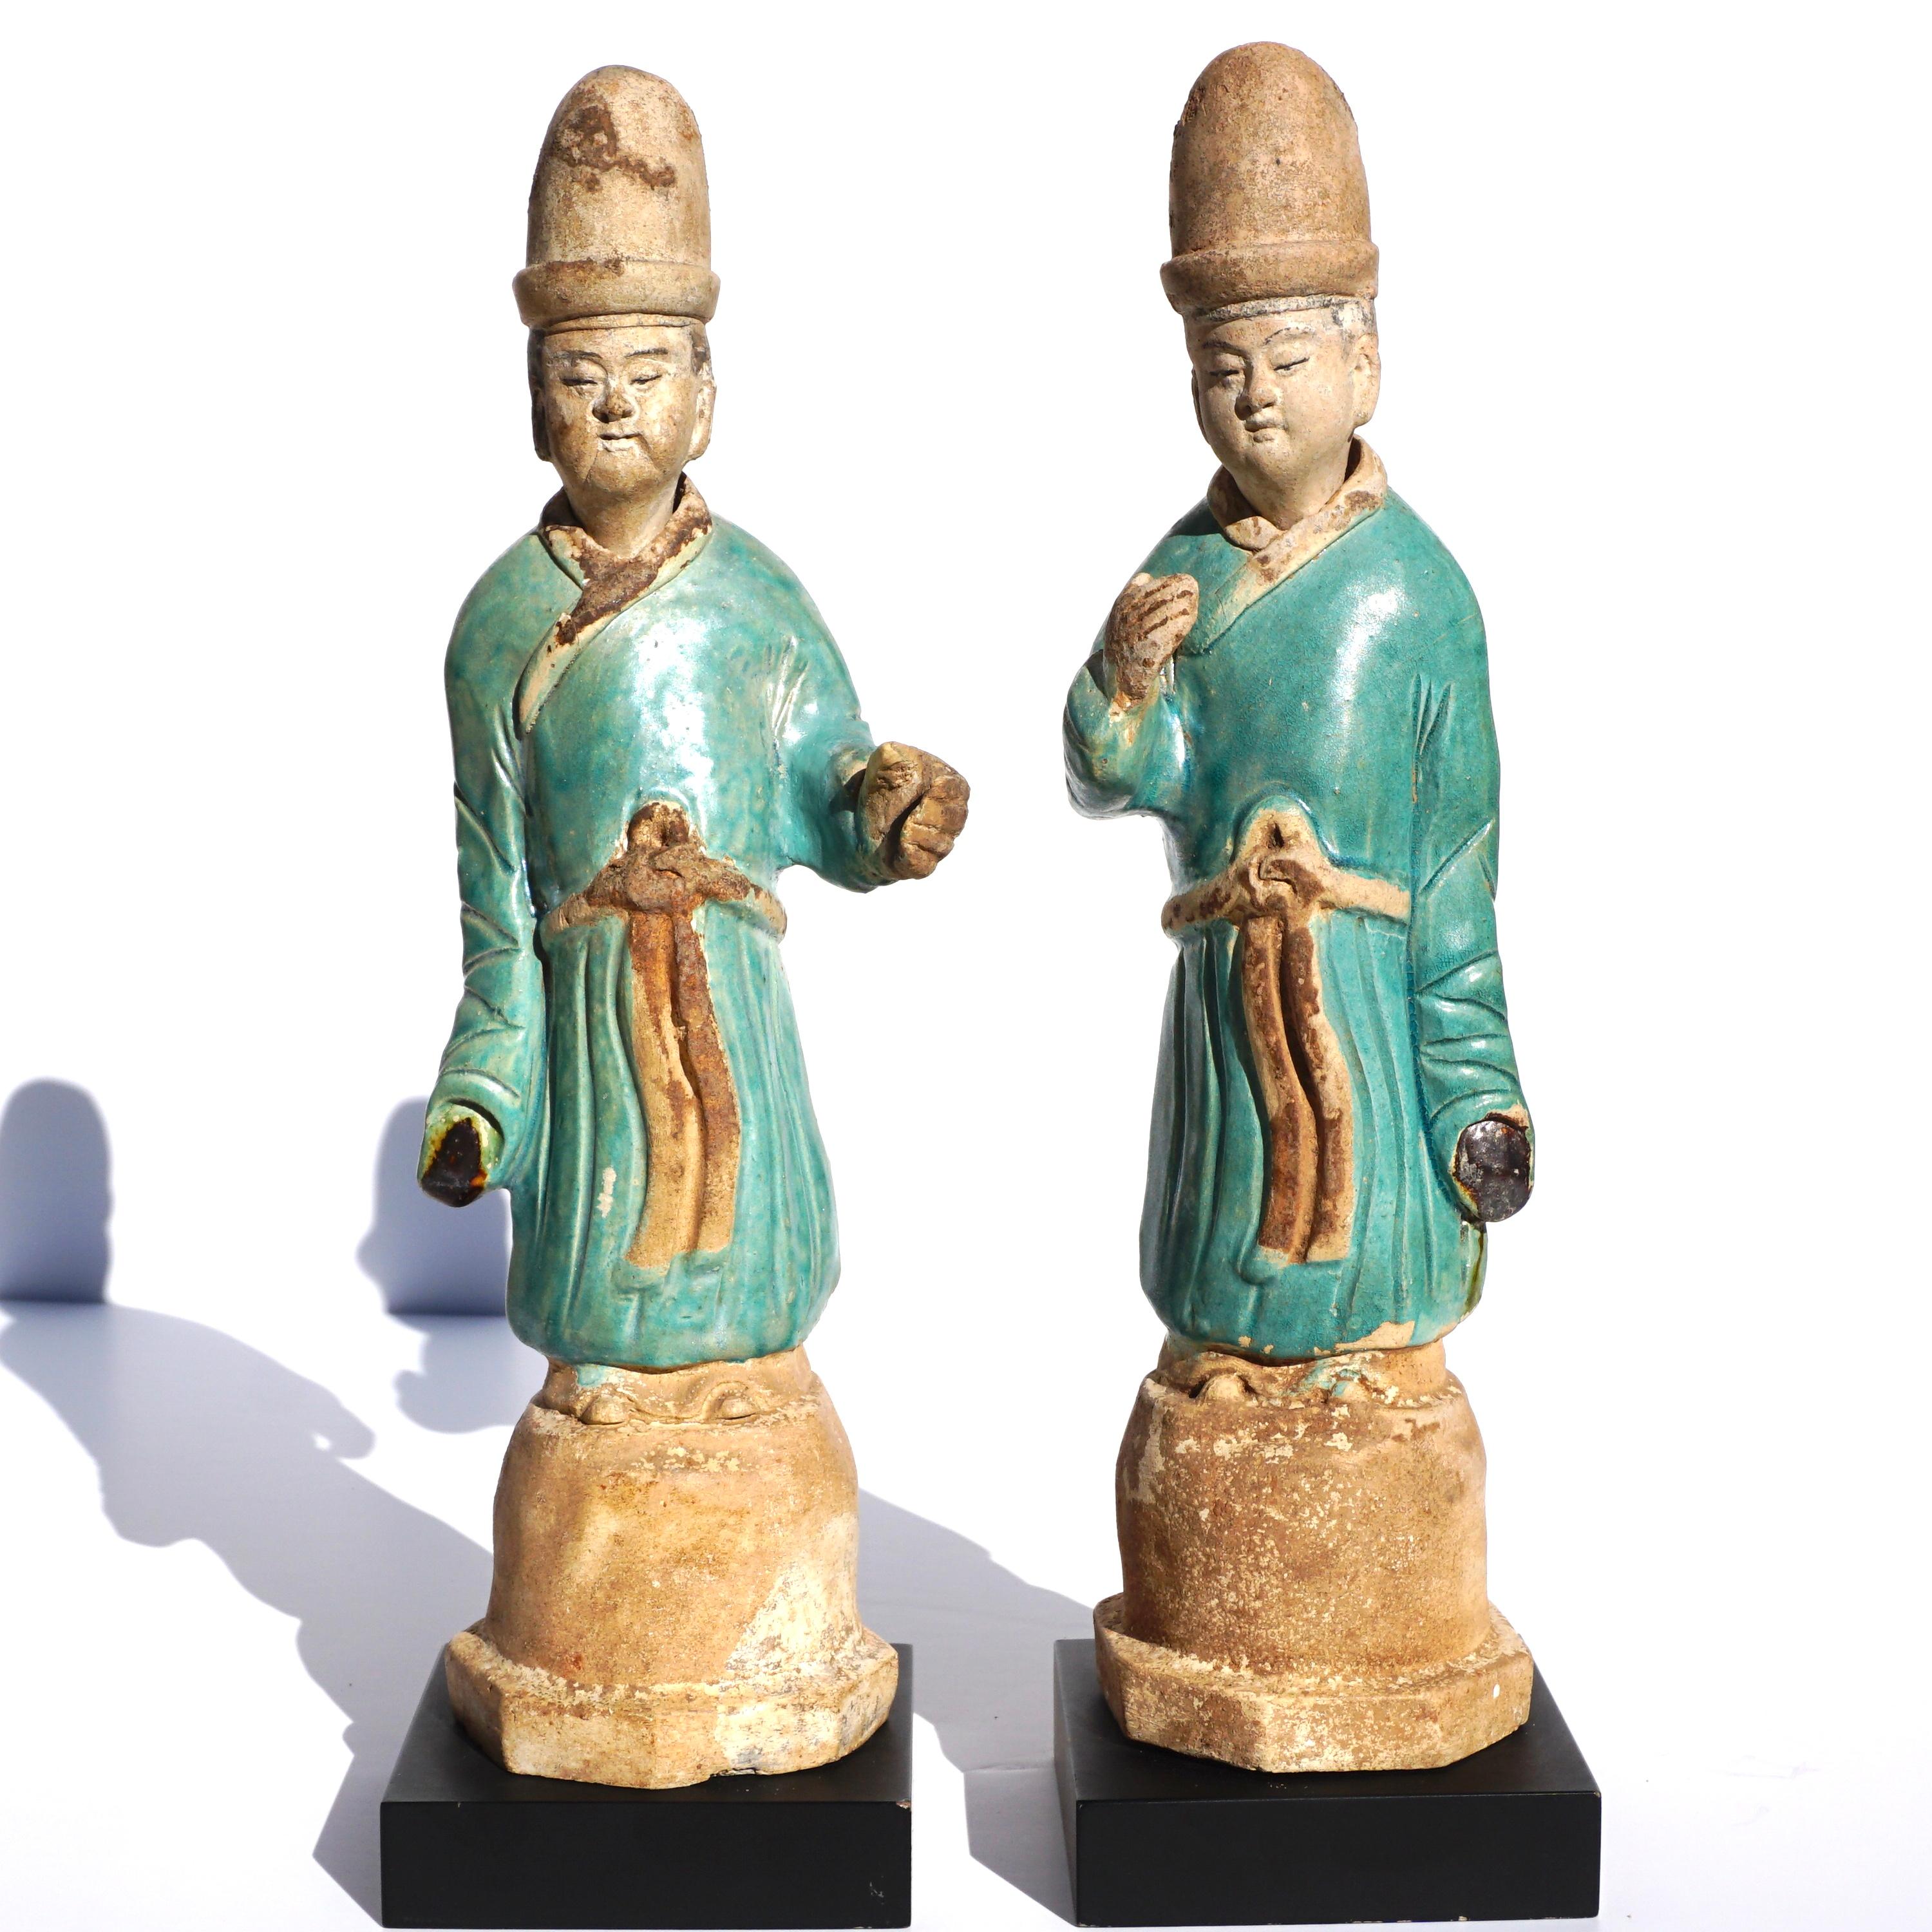 A pair of Ming dynasty sancai blue glazed pottery figures.
Circa 1500 AD Ming Dynasty

I have owned over 250 ming tomb figures including over 80 dignitary figures and these are rare in color and style. A fantastic pair in excellent condition with